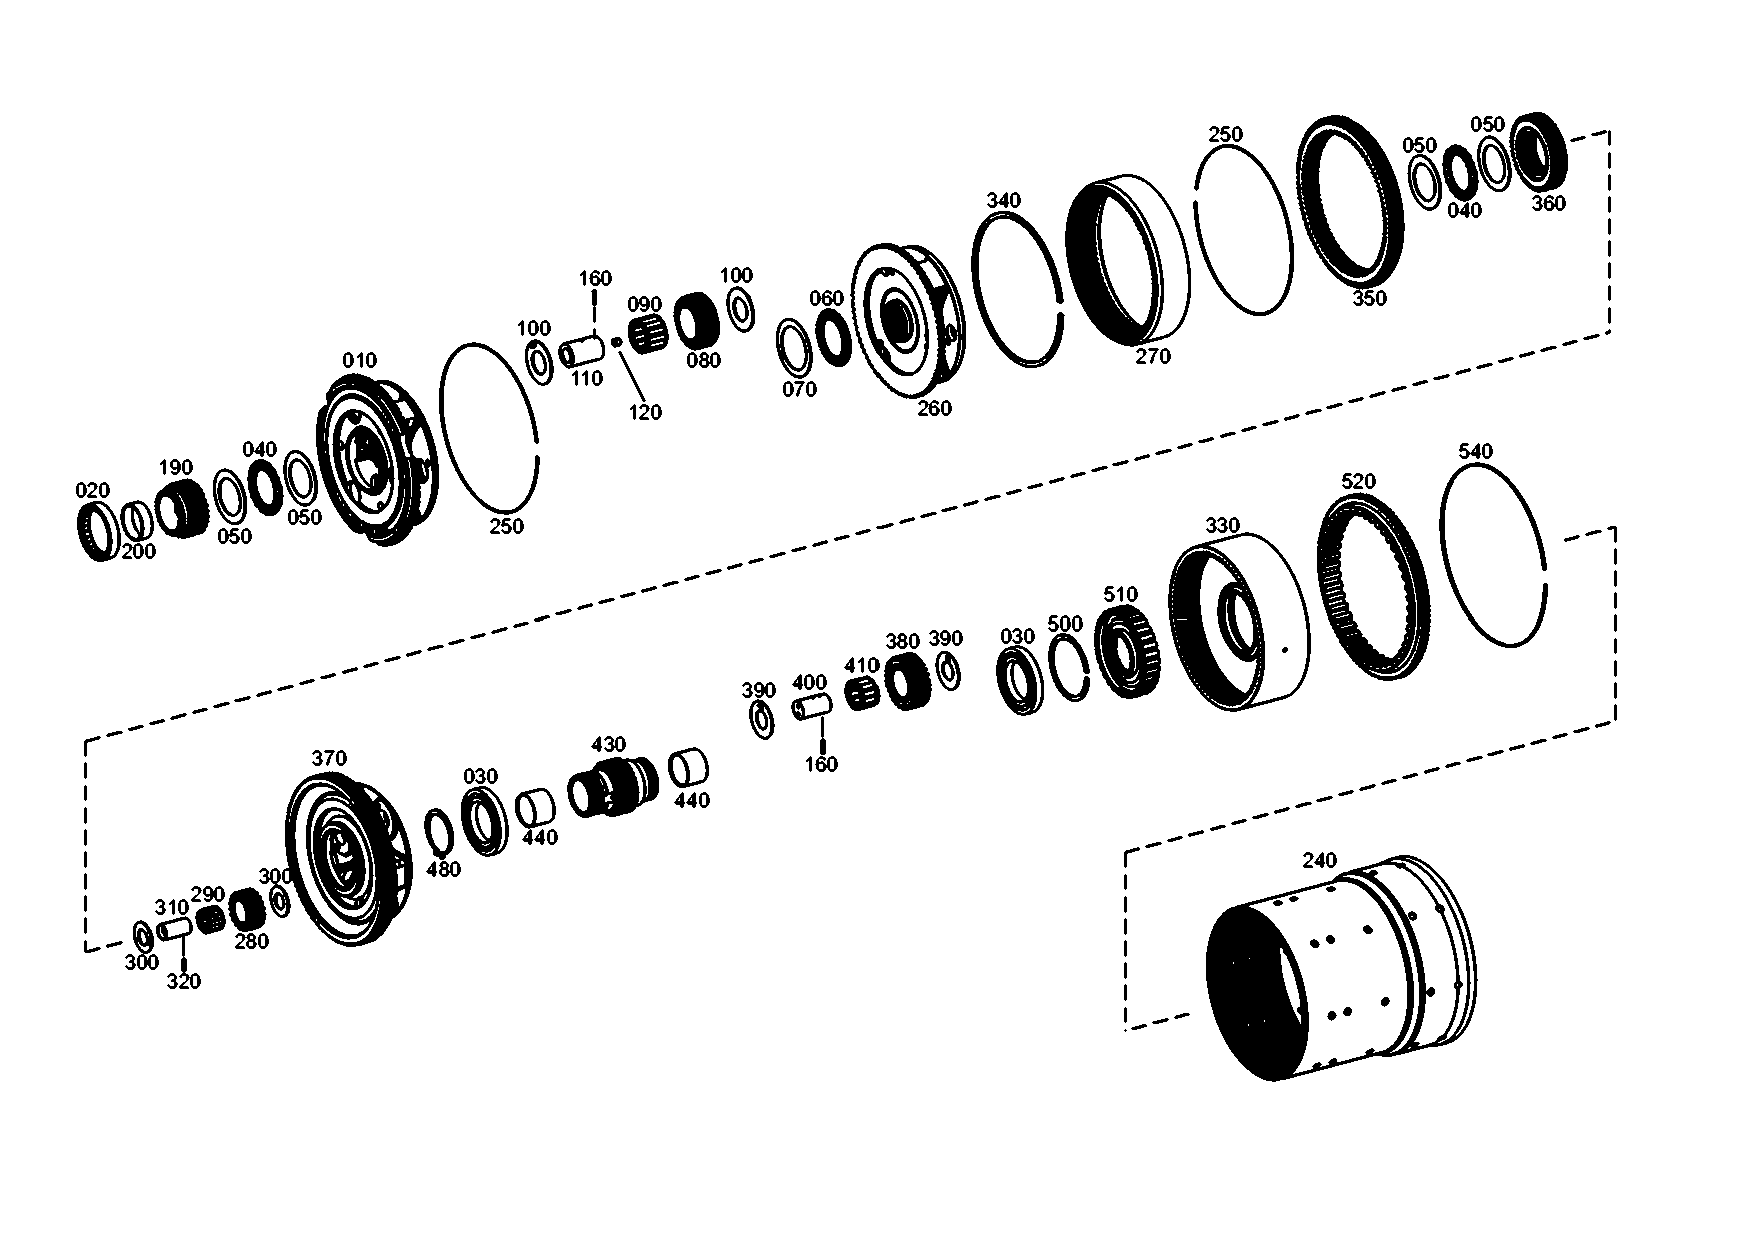 drawing for BEISSBARTH & MUELLER GMBH & CO. 09397960 - BALL BEARING (figure 4)